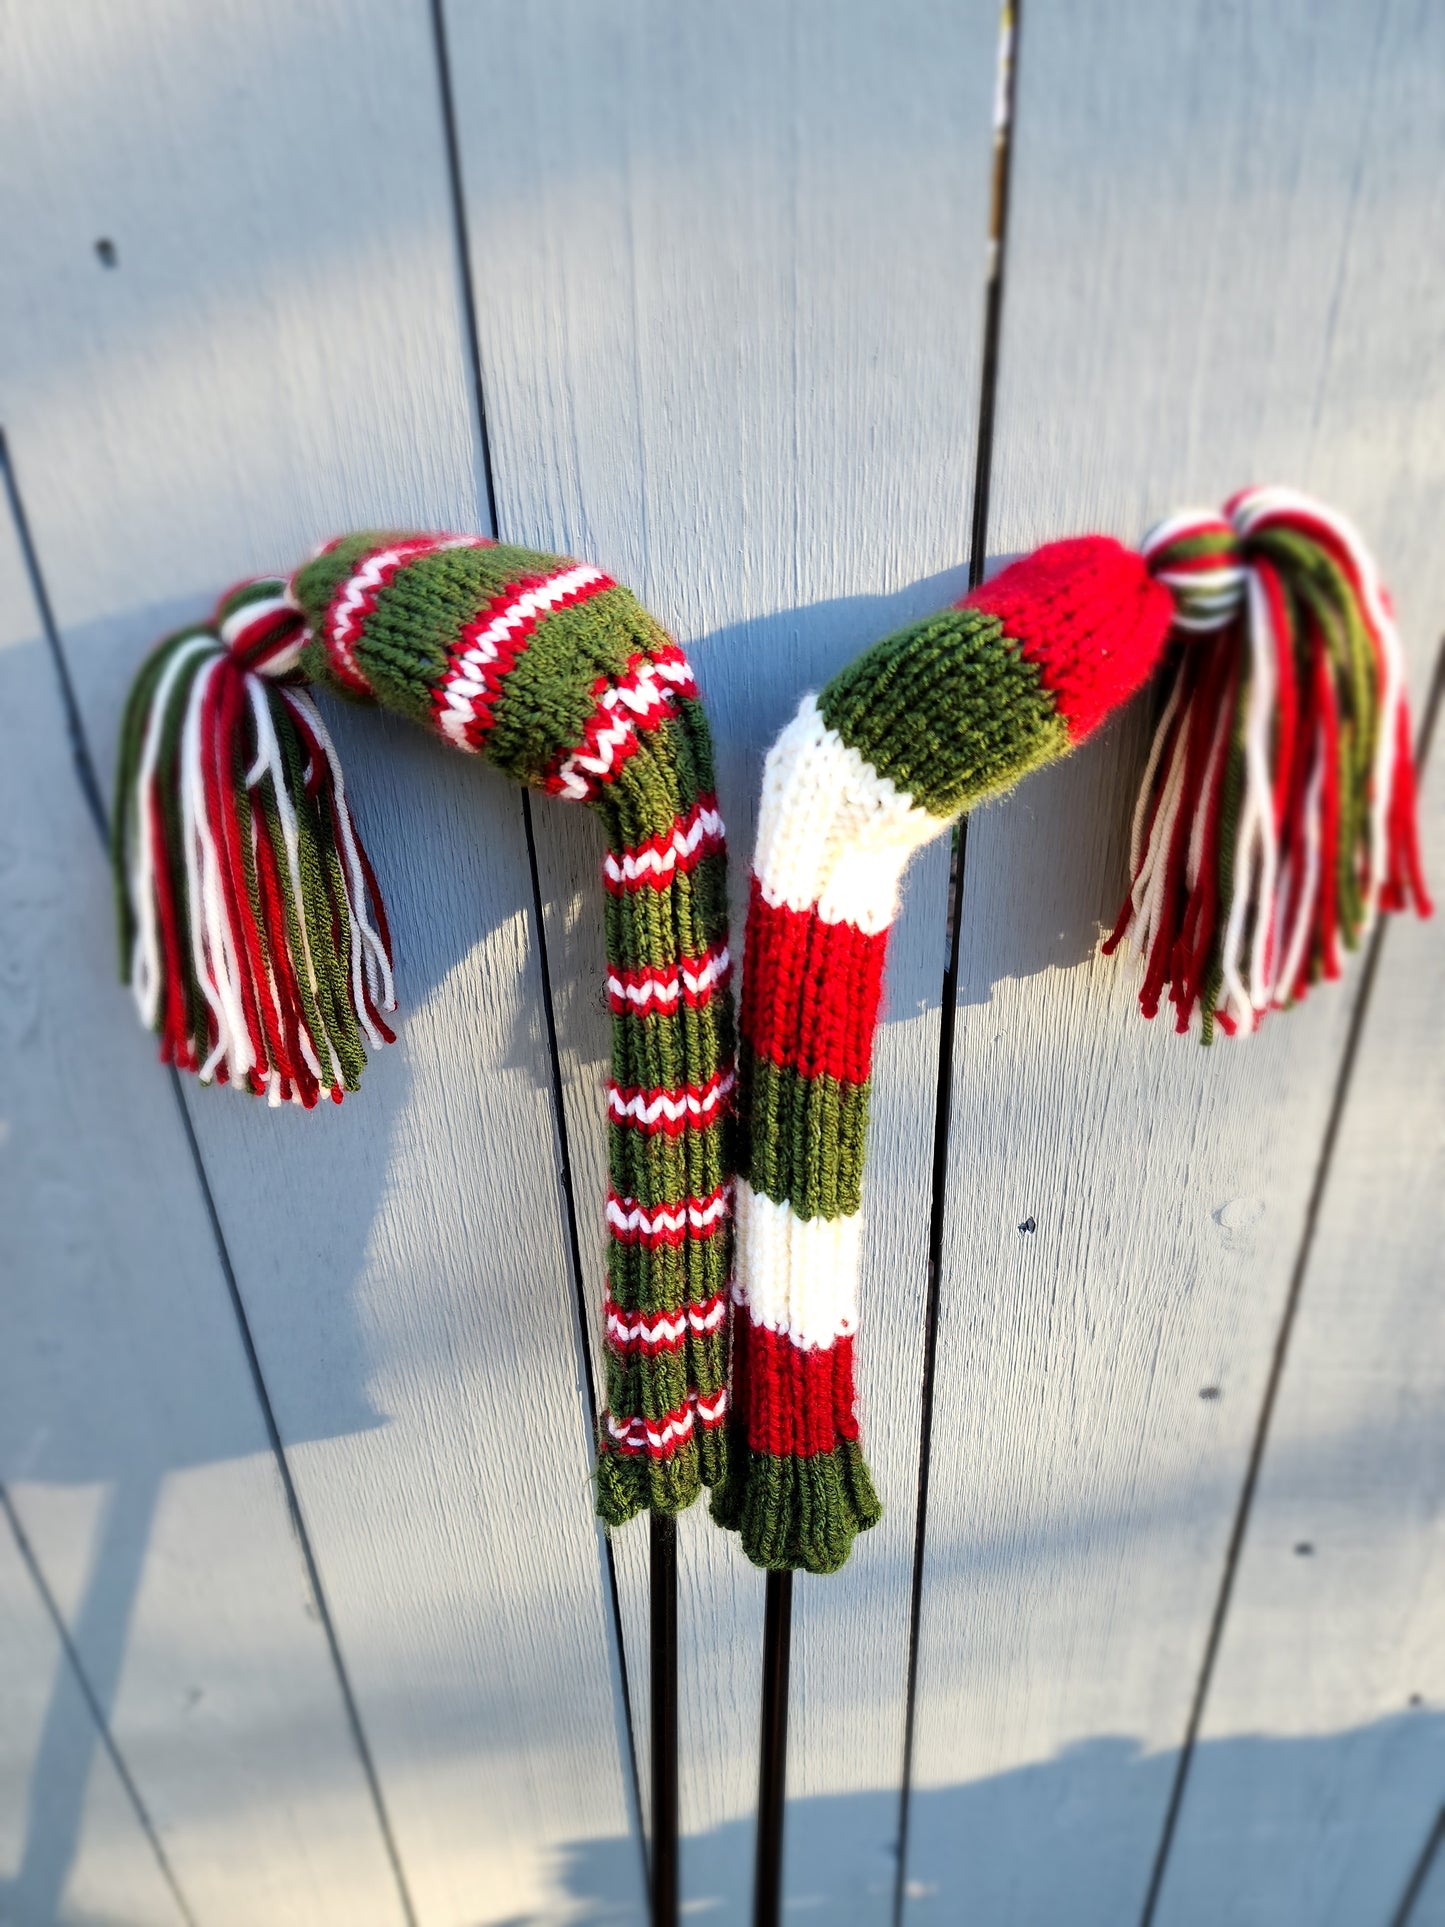 Two Hand Knit Golf Club Head Covers Retro-Vintage Green, Red & Off White with Tassels for Fairway Woods - Austinknittylimits